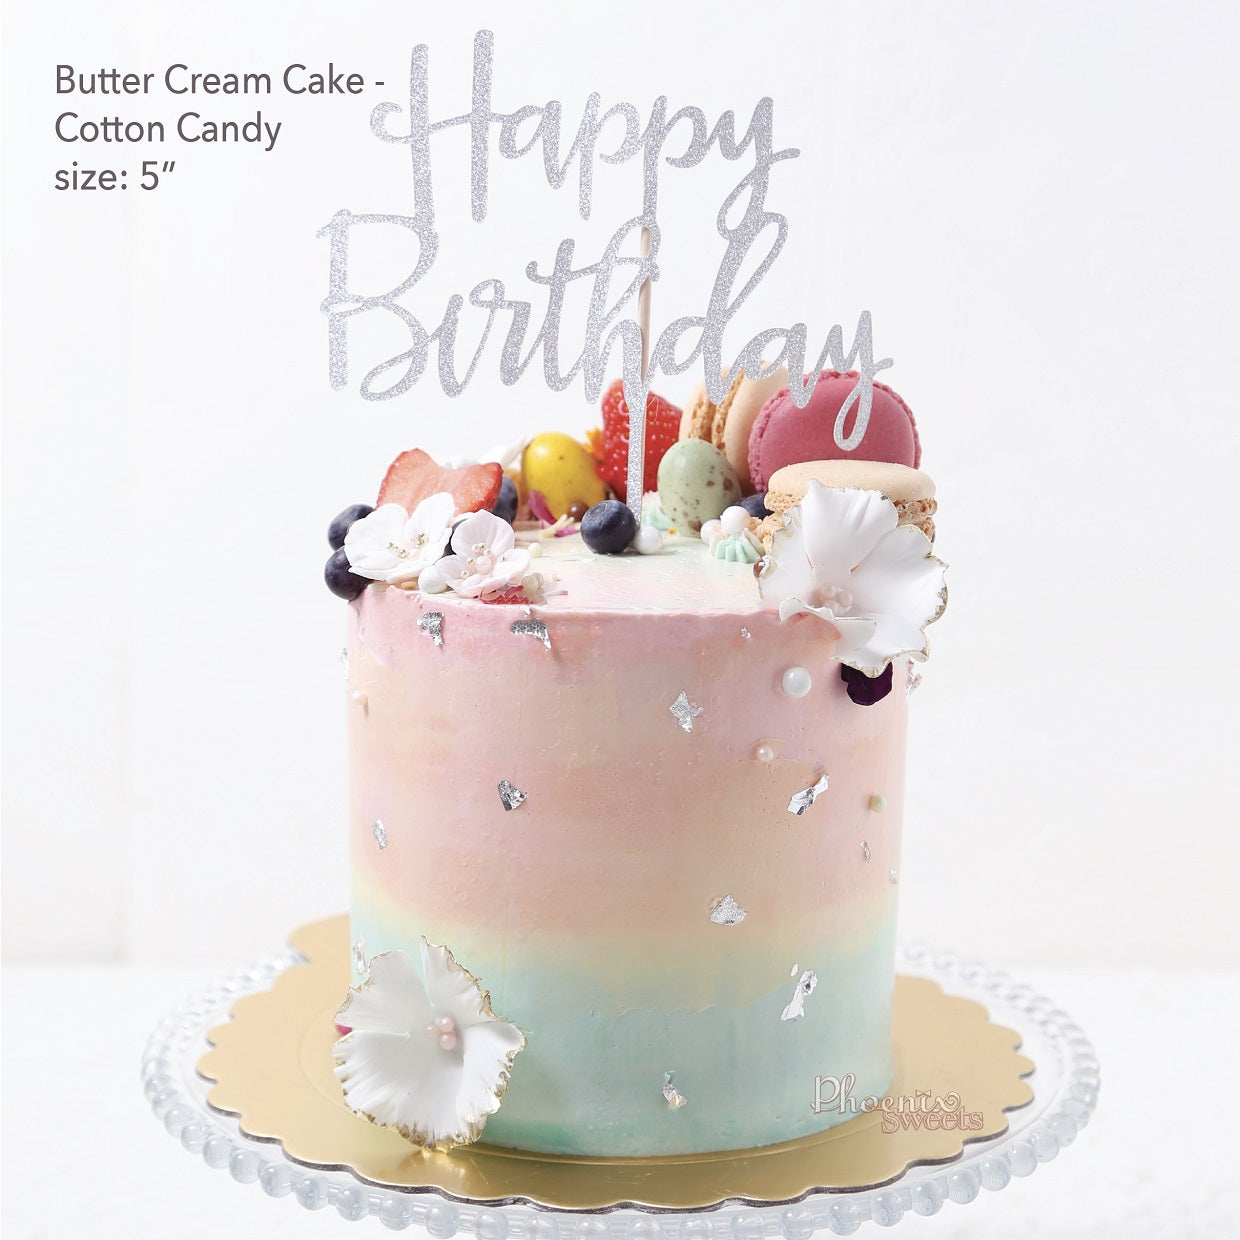 Butter Cream Cake- Cotton Candy, Bouquet & cake combo $2380